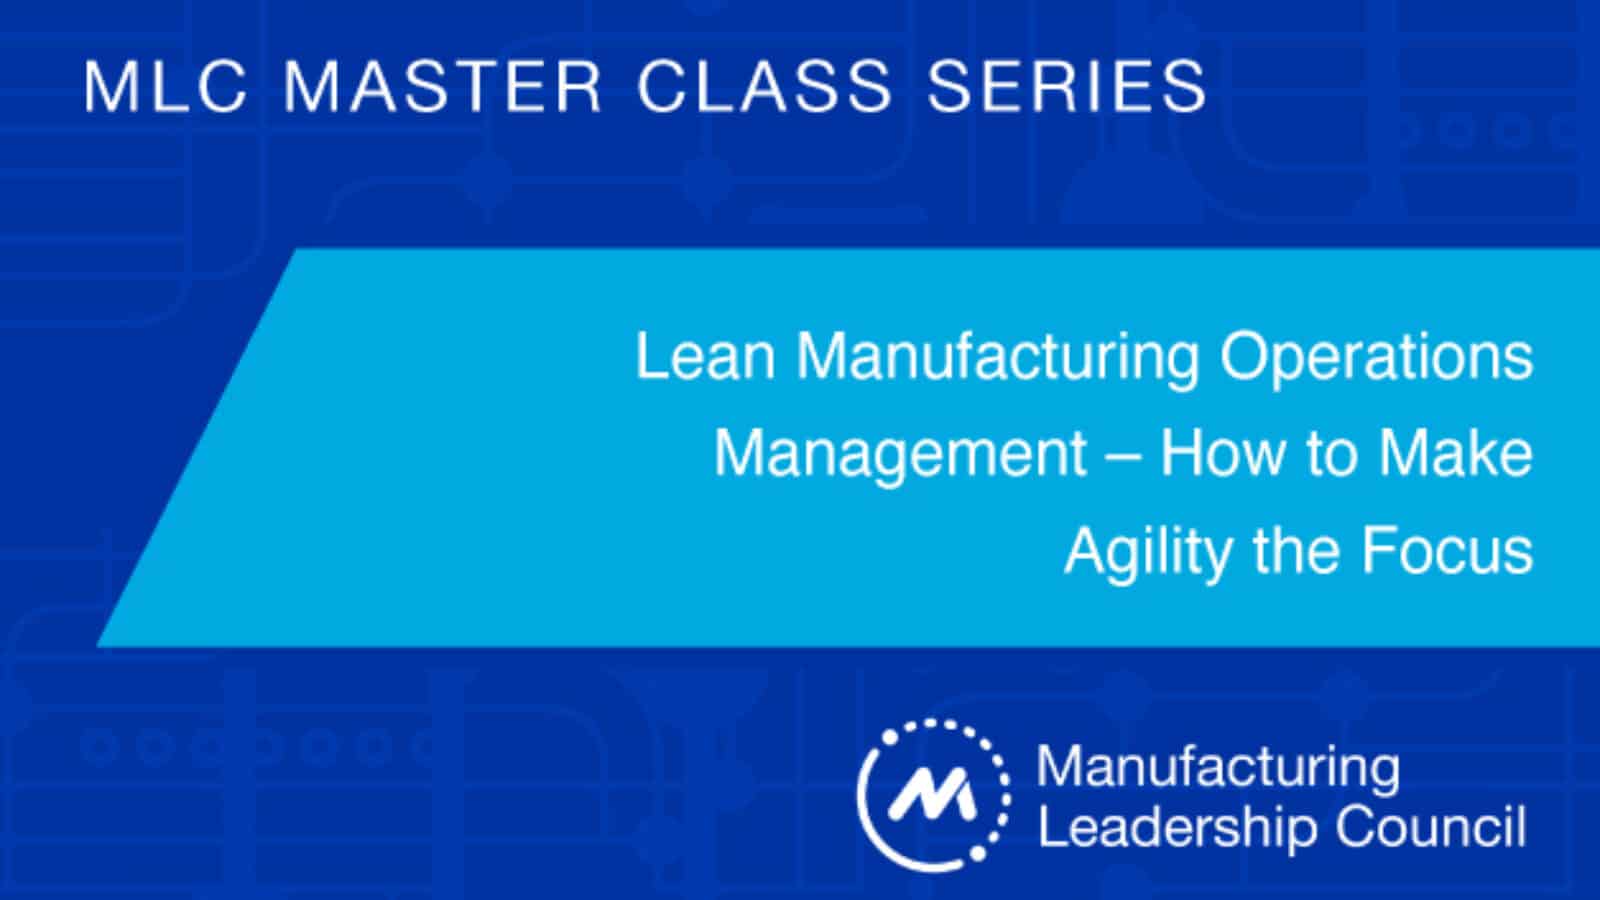 MLC Master Class Series: Lean Manufacturing Operations Management – How to Make Agility the Focus